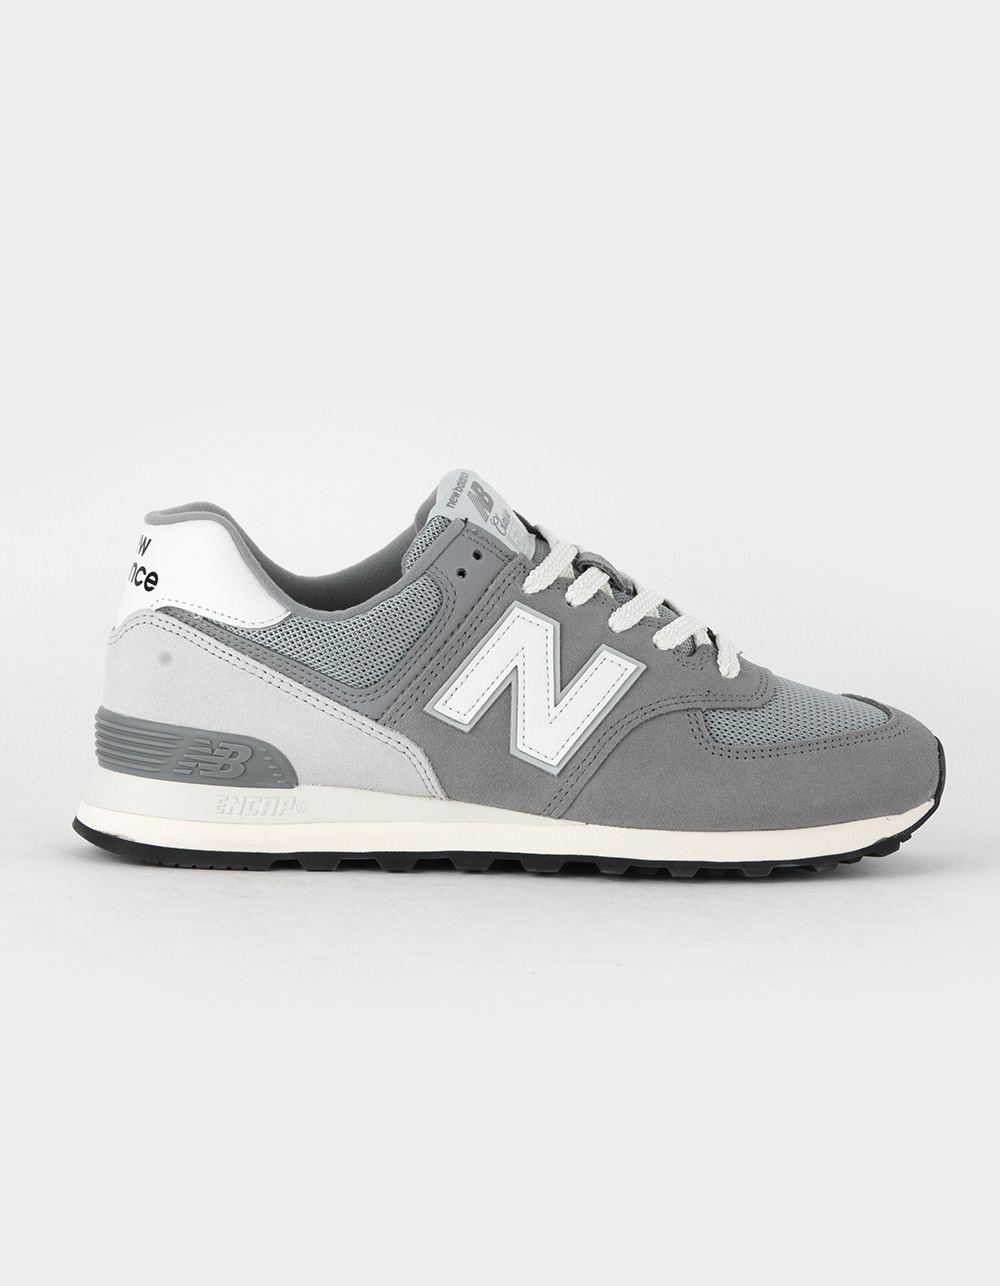 NEW BALANCE 574 Shoes - GRAY/WHITE | Tillys